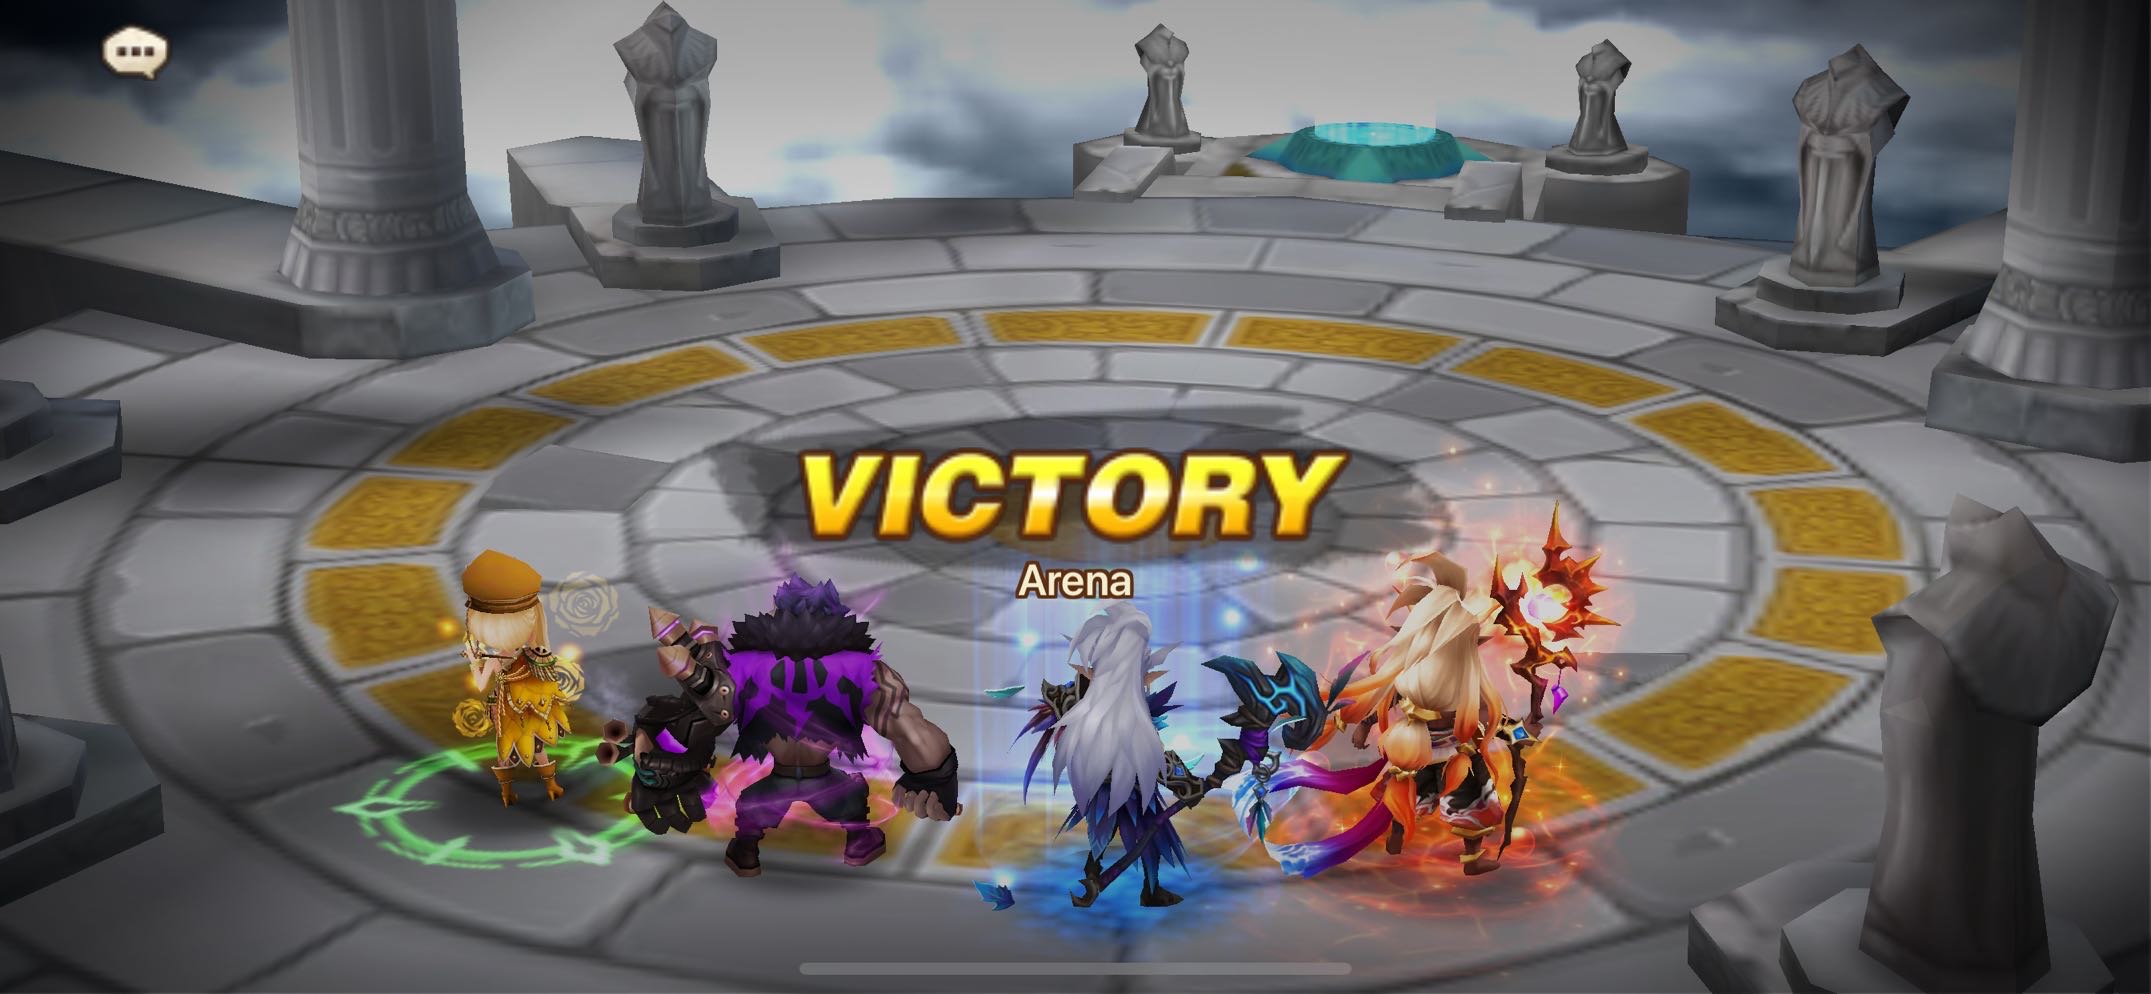 DARK RYU+LIGHT MAGE(DOROTHY)+28naT5+ a lot of skinS+Mid perfect accounT+fuLL ACCESS